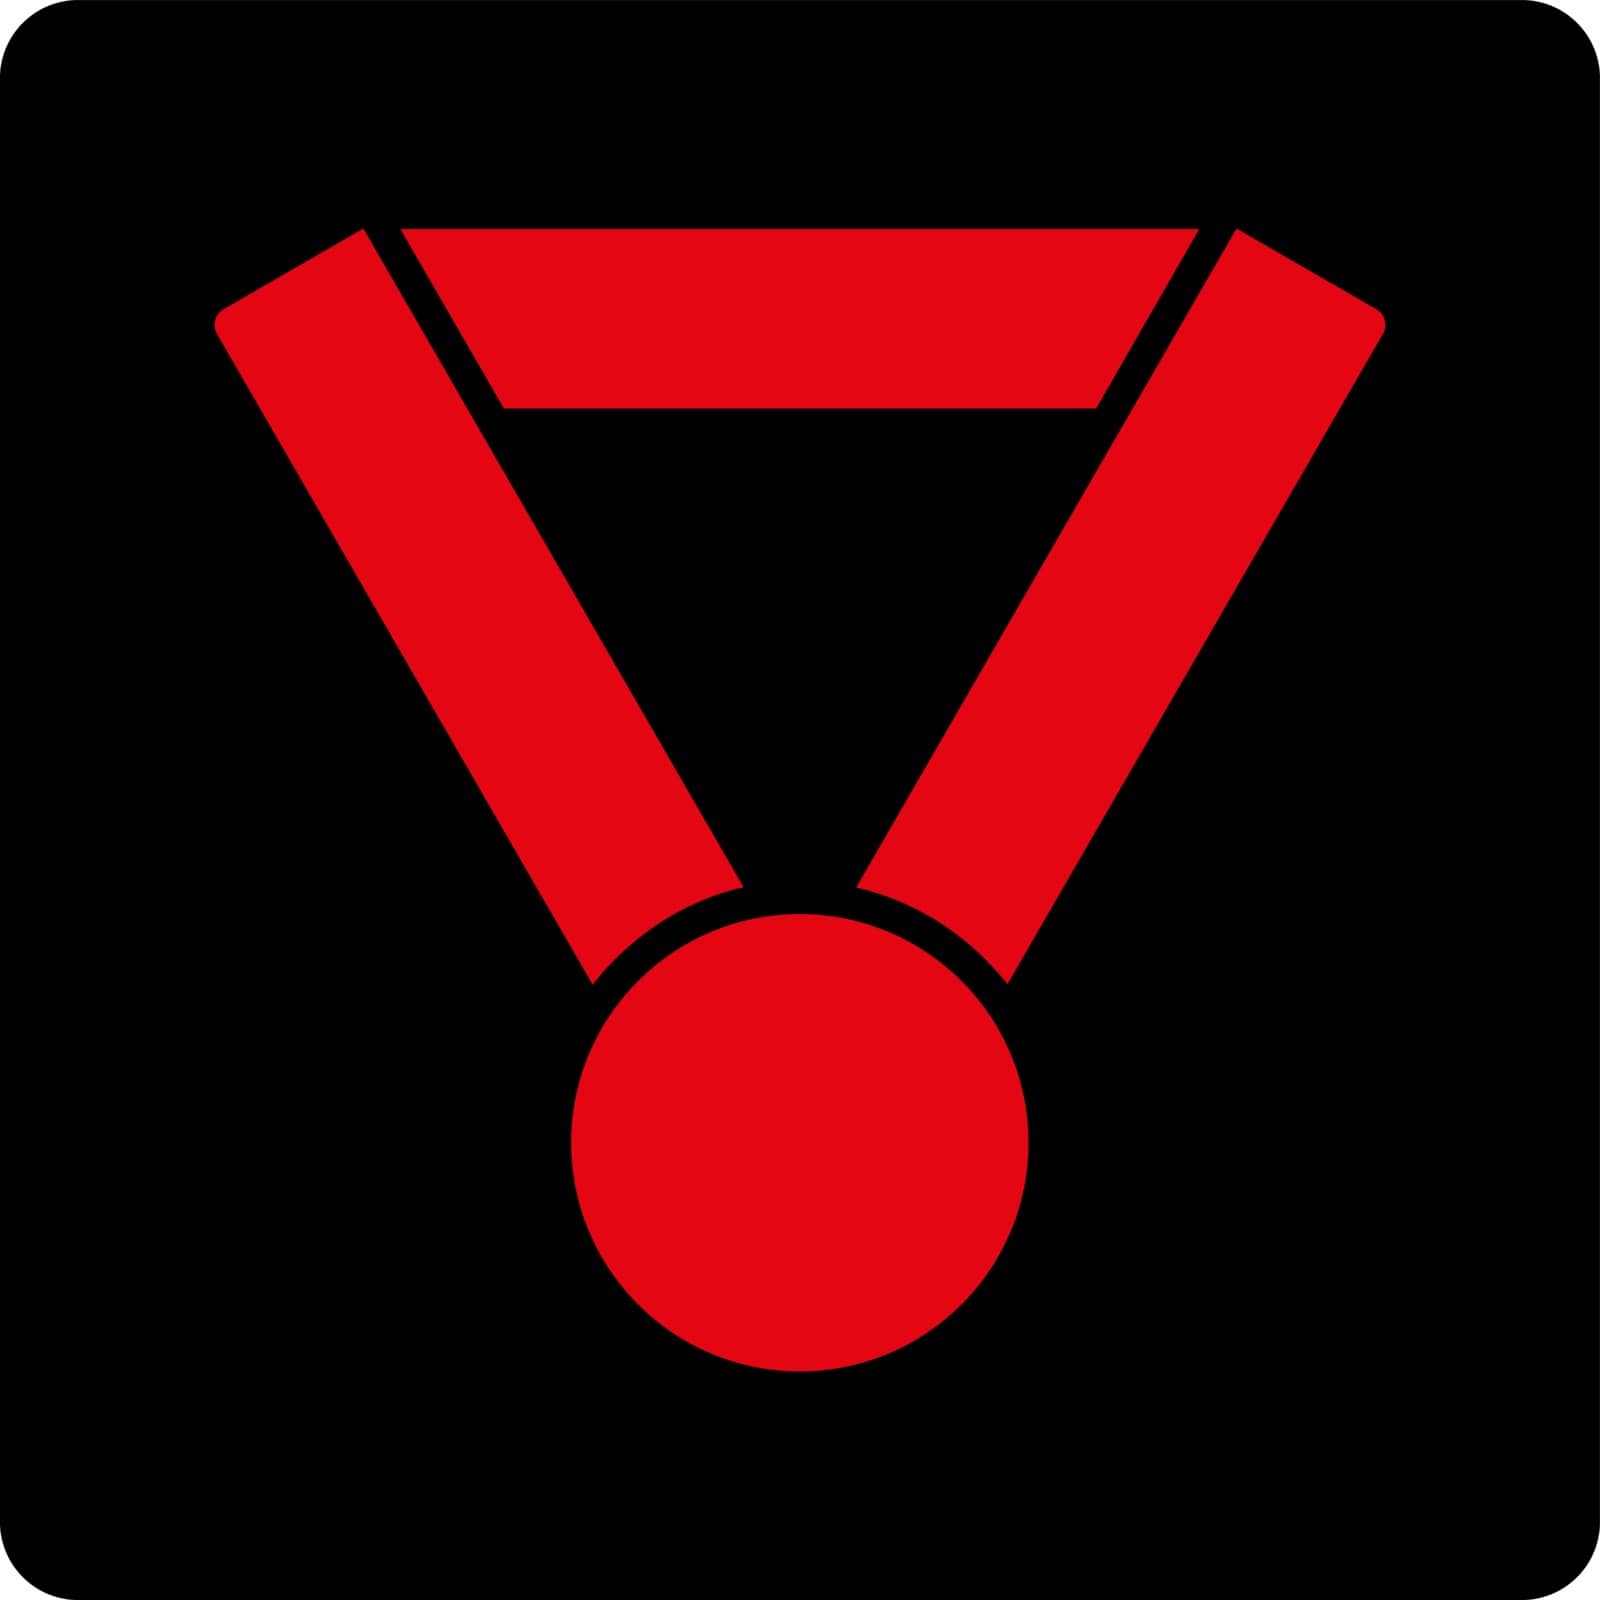 Champion award icon from Award Buttons OverColor Set. Icon style is intensive red and black colors, flat rounded square button, white background.